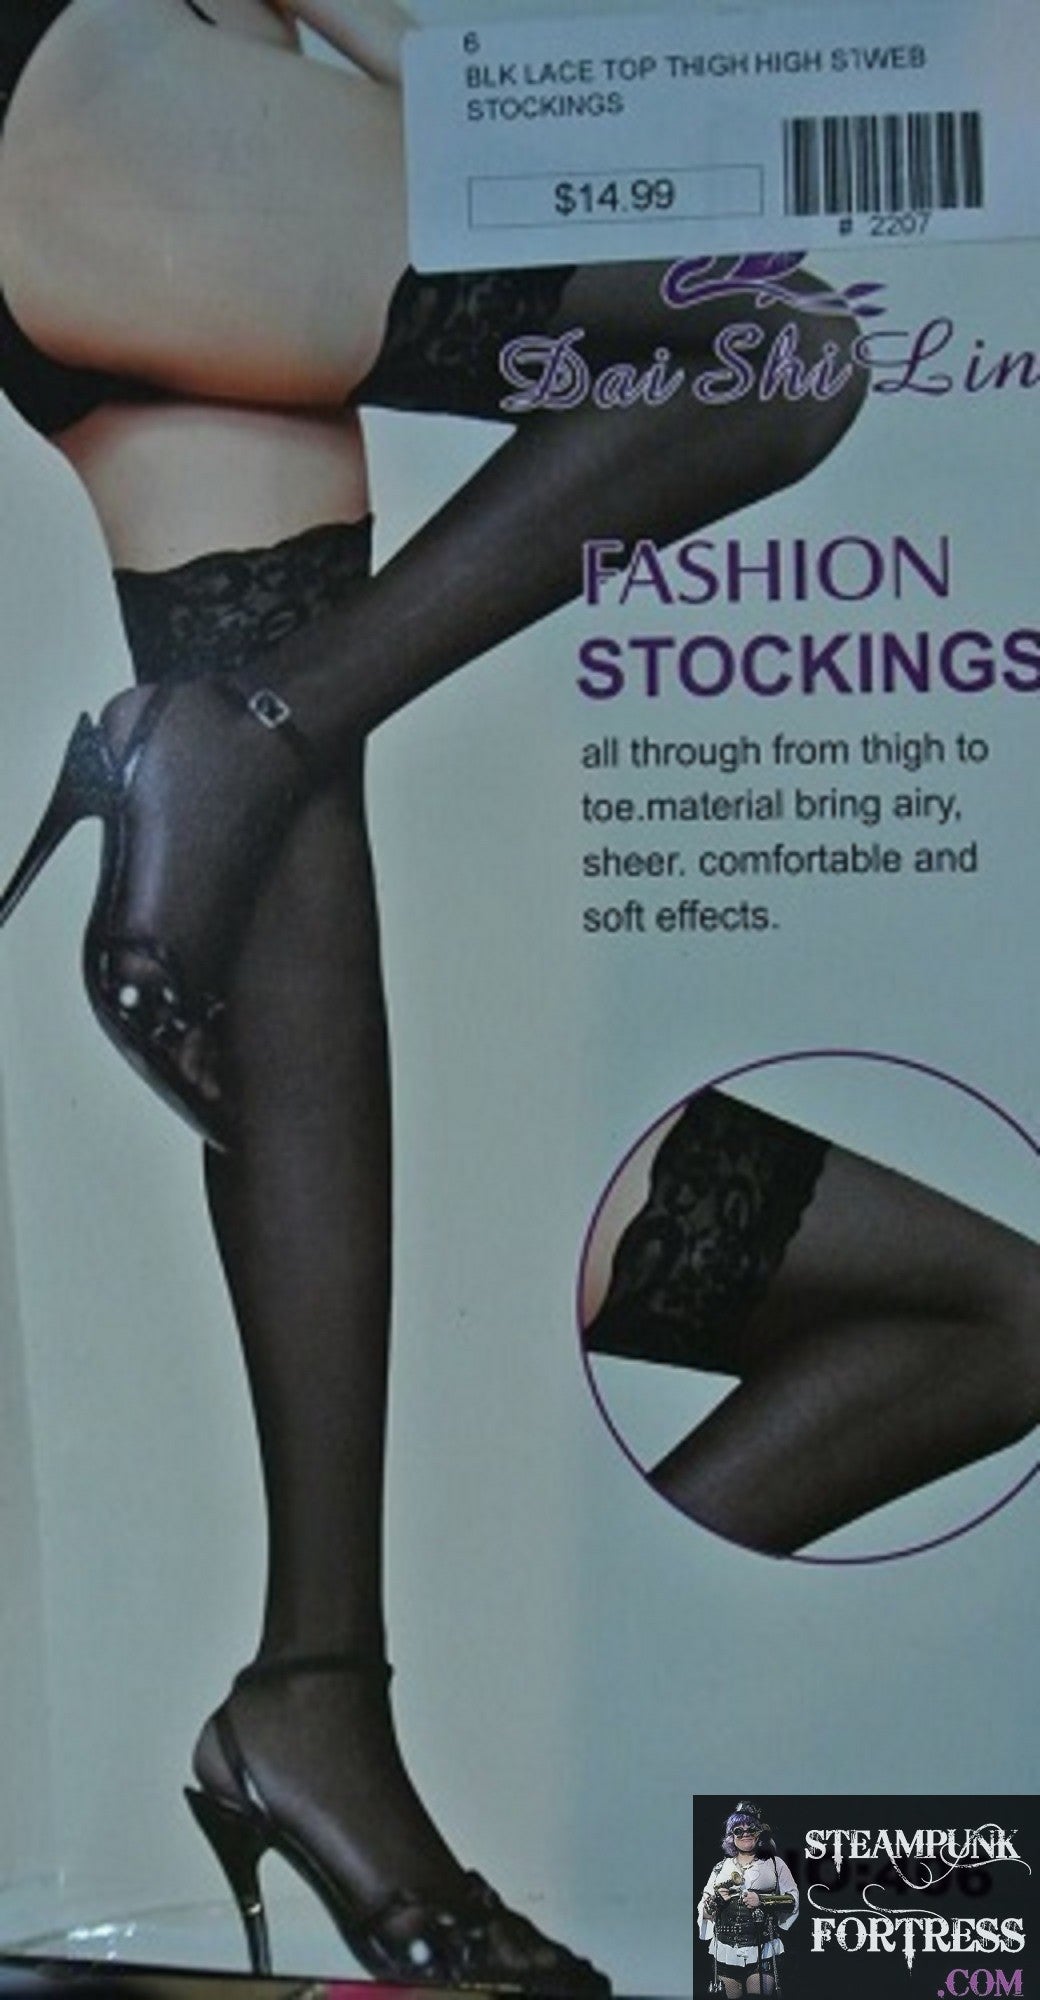 BLACK SHEER LACE TOP NEW OVER THE KNEE THIGH HIGHS HIS TIGHTS NYLONS HOSIERY STOCKINGS ONE SIZE FITS MOST - NEW - MASS PRODUCED